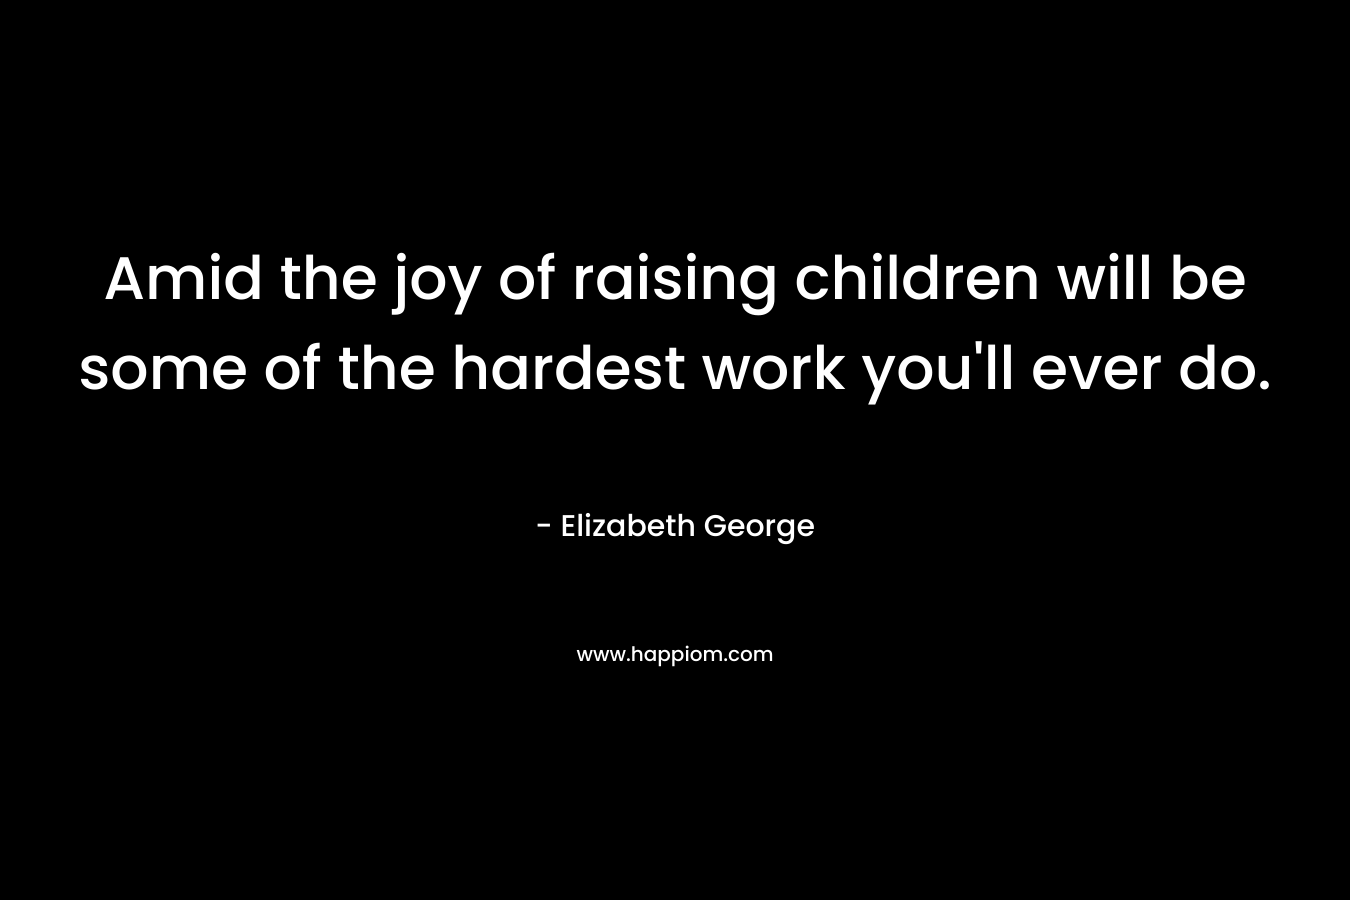 Amid the joy of raising children will be some of the hardest work you’ll ever do. – Elizabeth George